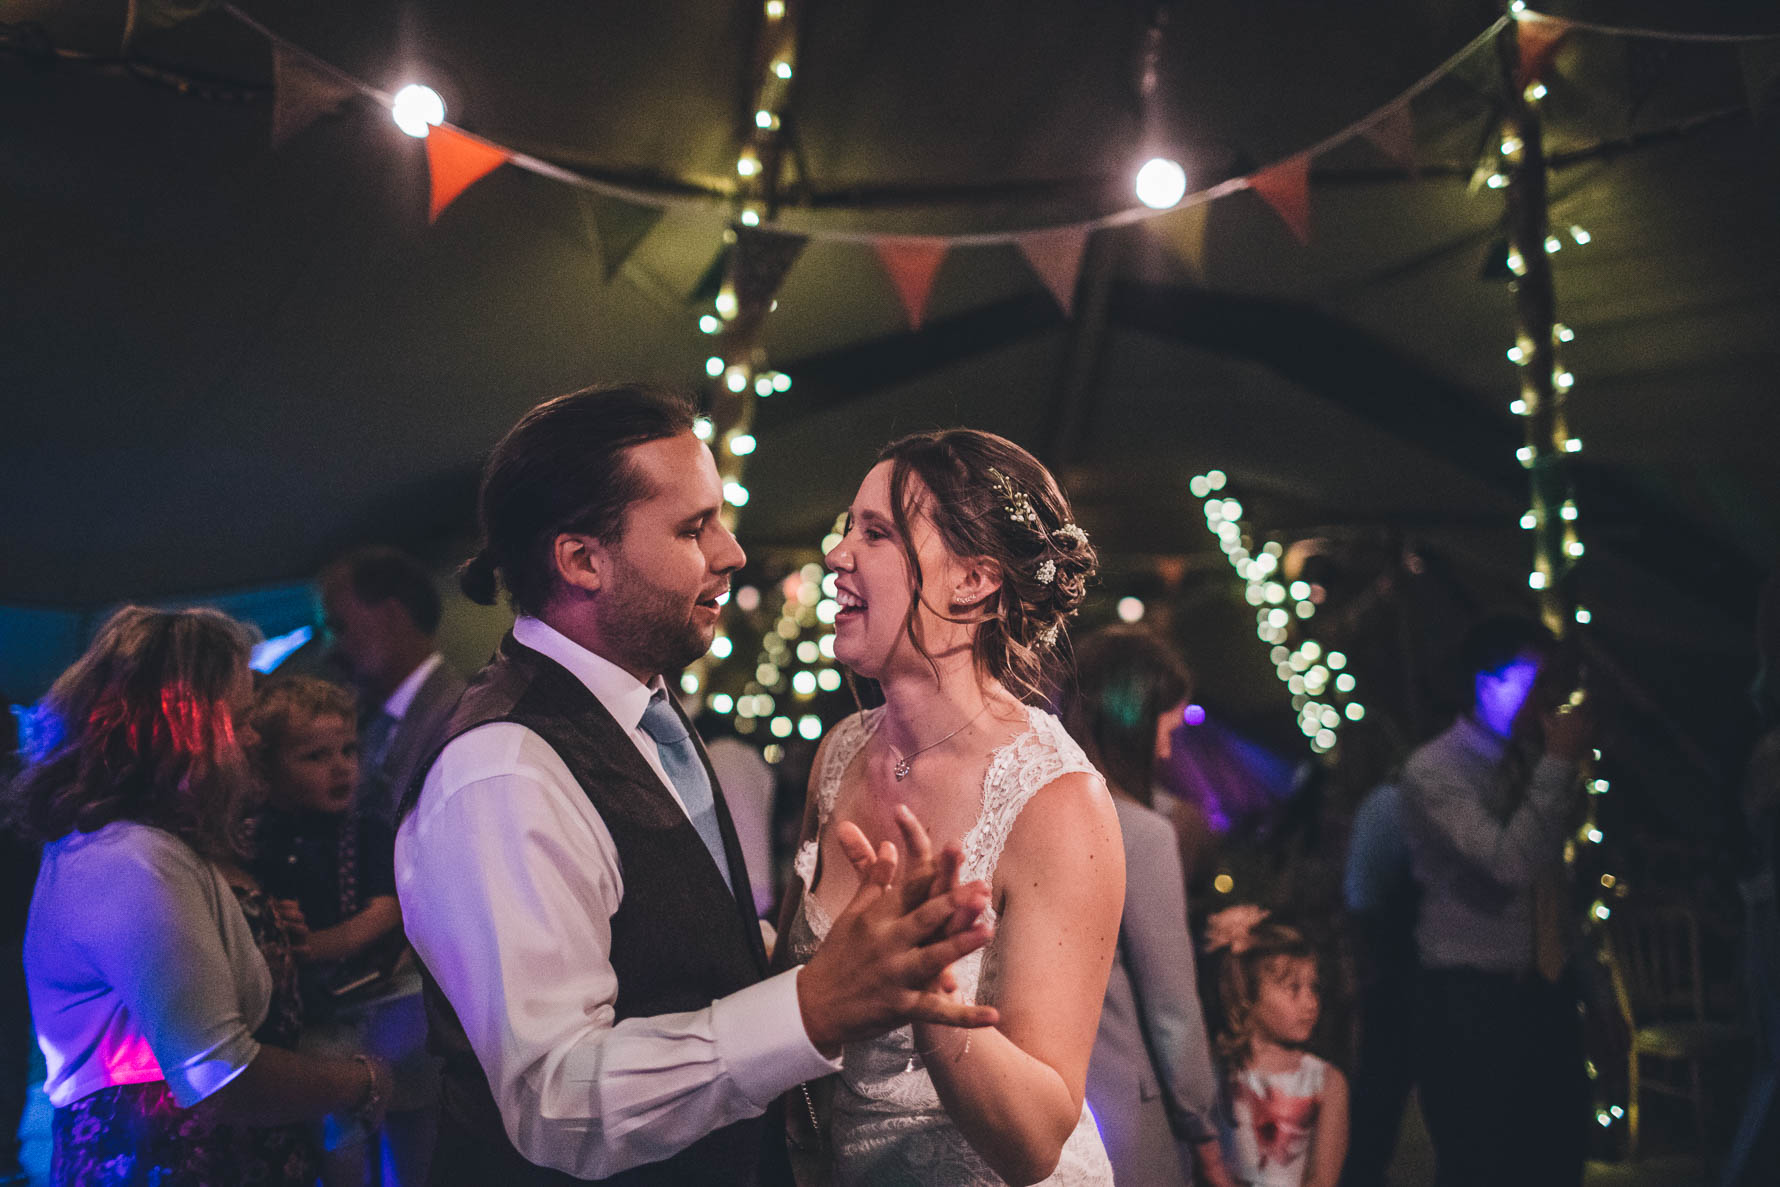 Bride and groom dancing with their hands together inside a tipi with bunting and fairylights in the background